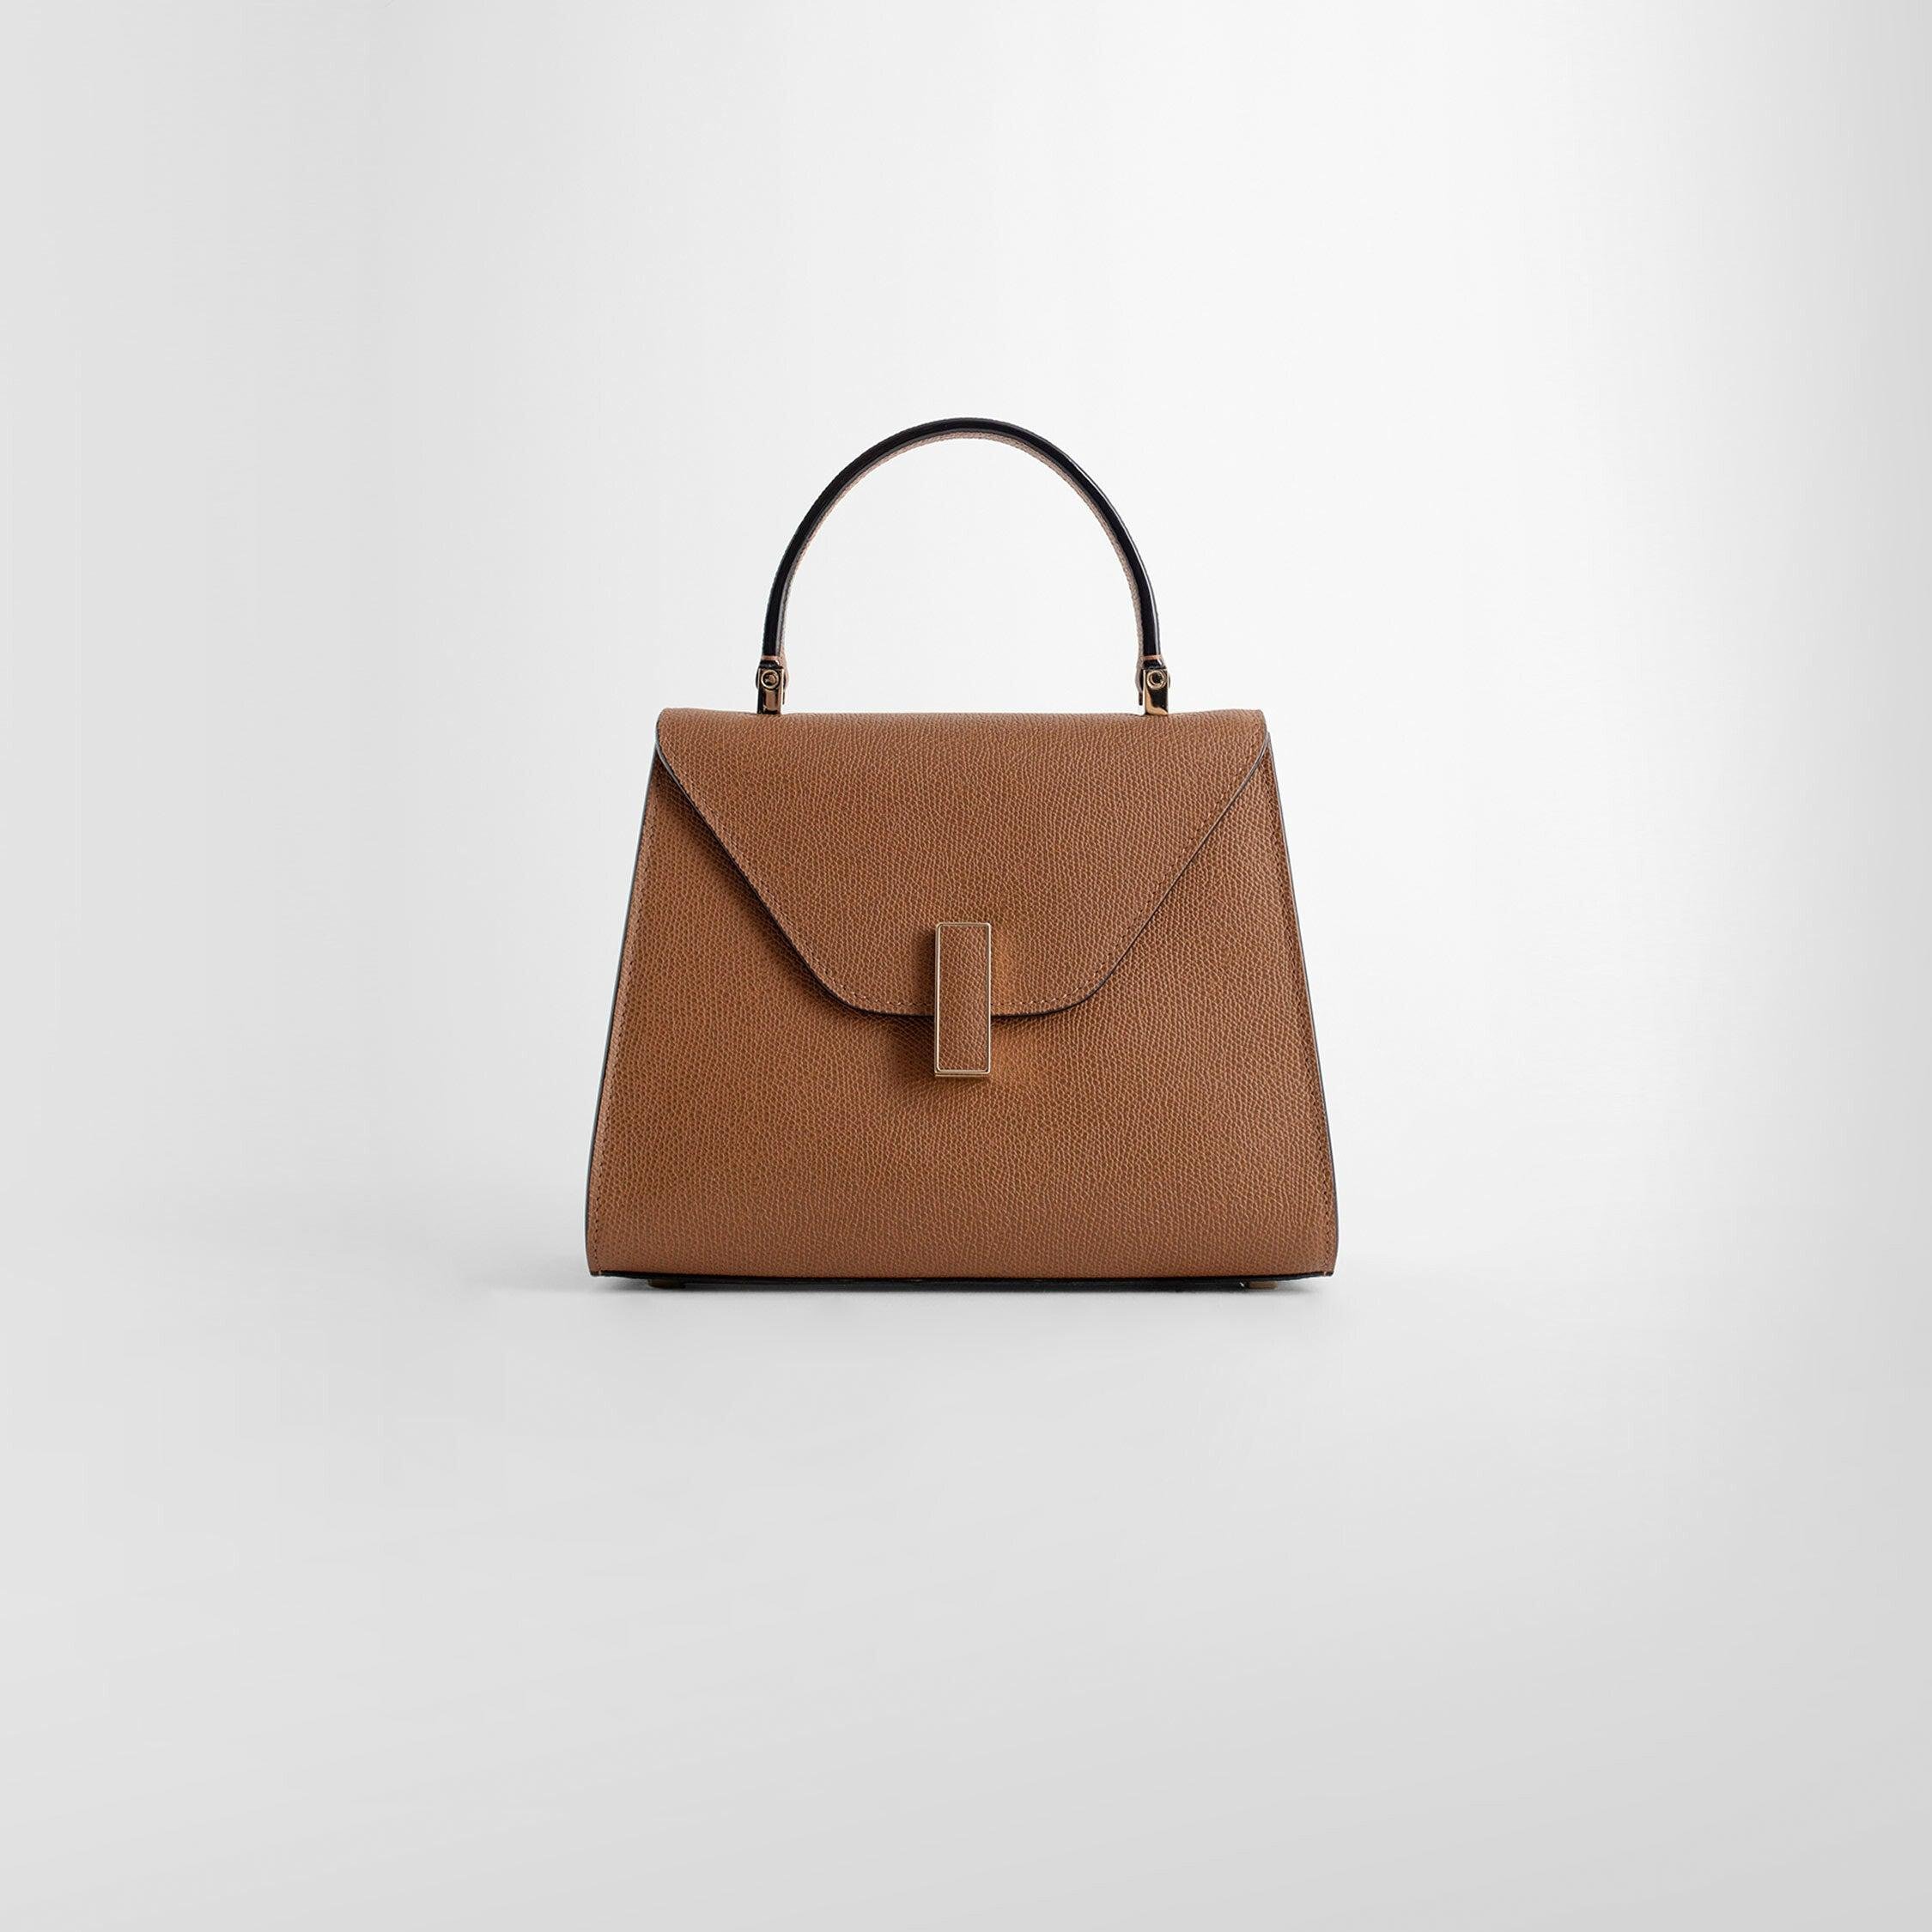 VALEXTRA WOMAN BROWN TOP HANDLE BAGS by VALEXTRA